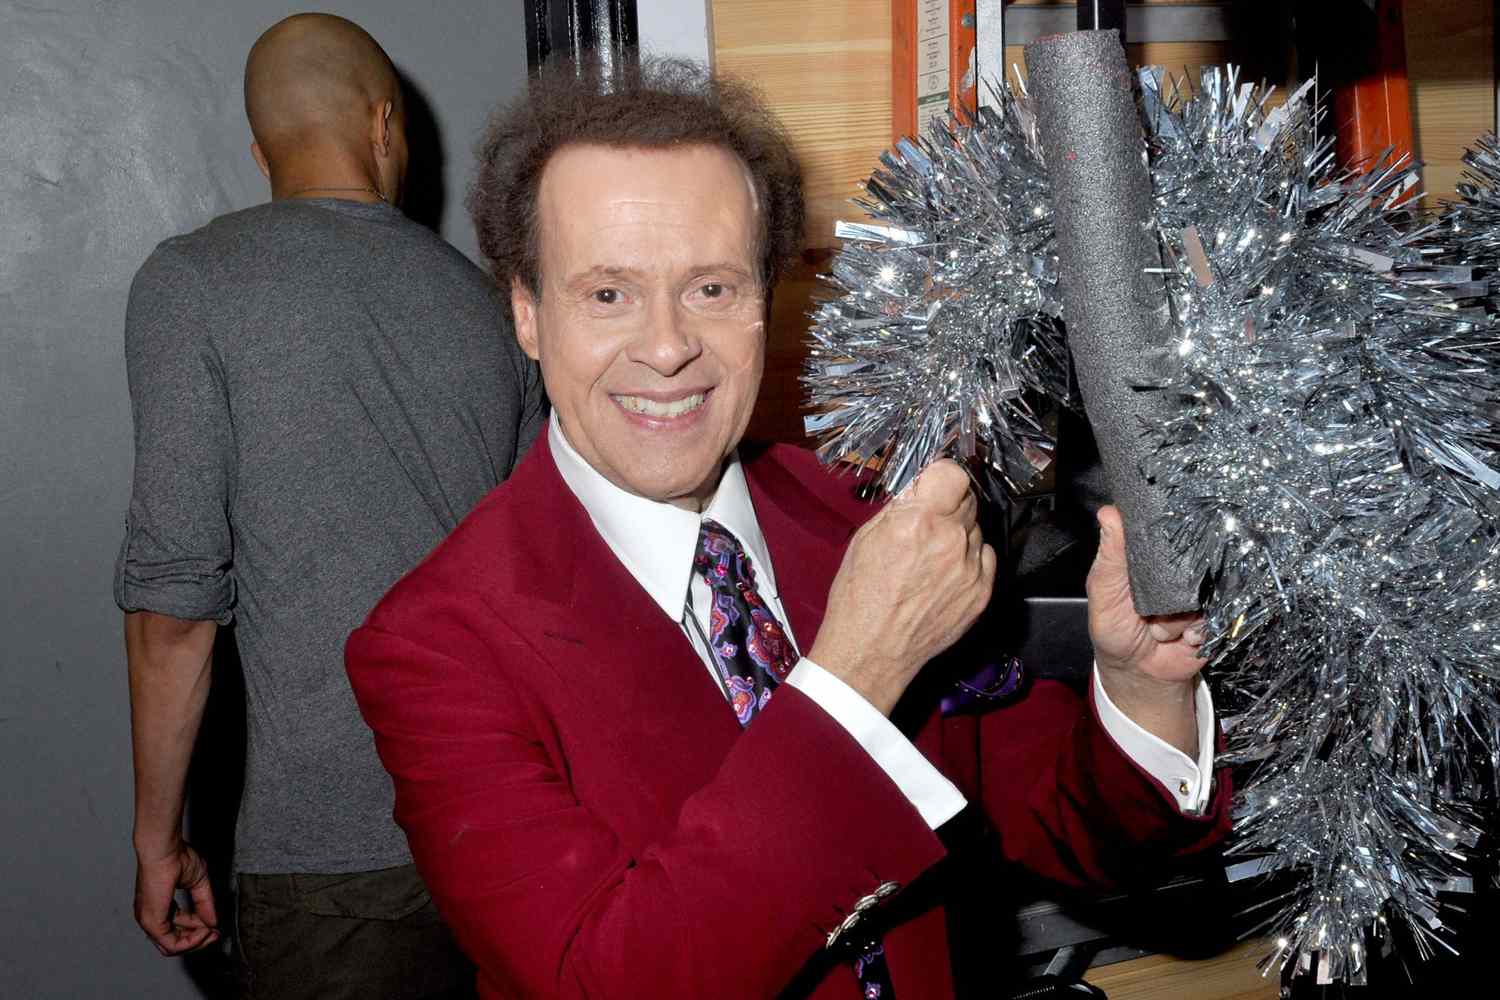 Richard Simmons at SPARKLE: An All-Star Holiday Concert in Los Angeles on Dec. 13, 2013